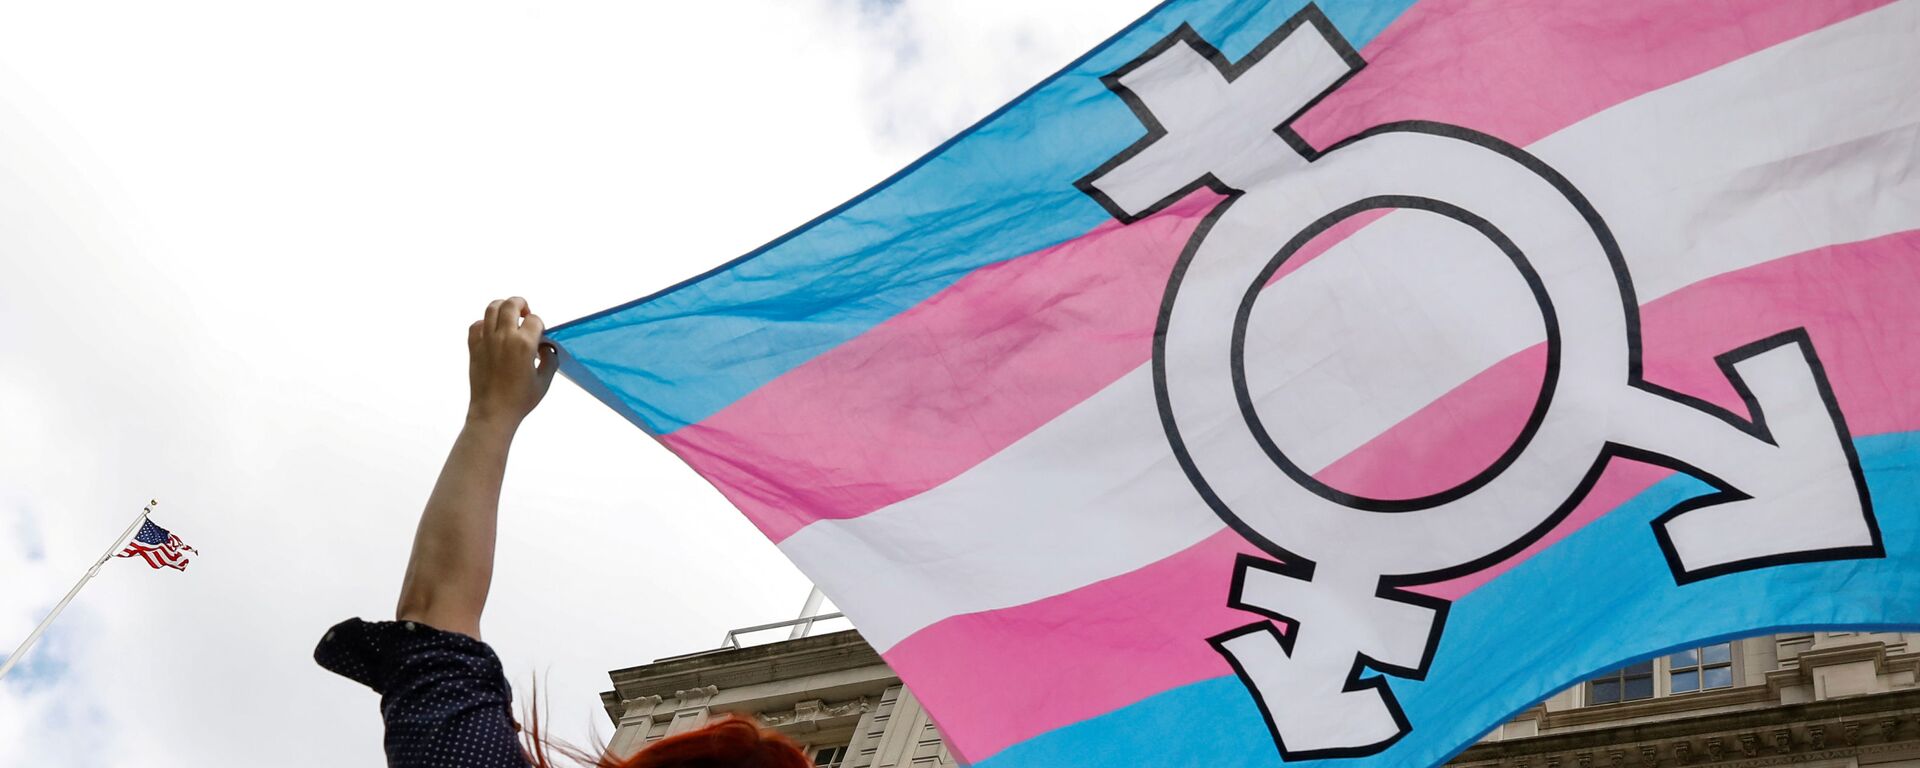 FILE PHOTO: A person holds up a flag during rally to protest the Trump administration's reported transgender proposal to narrow the definition of gender to male or female at birth, at City Hall in New York City, U.S., October 24, 2018. - Sputnik International, 1920, 07.04.2021